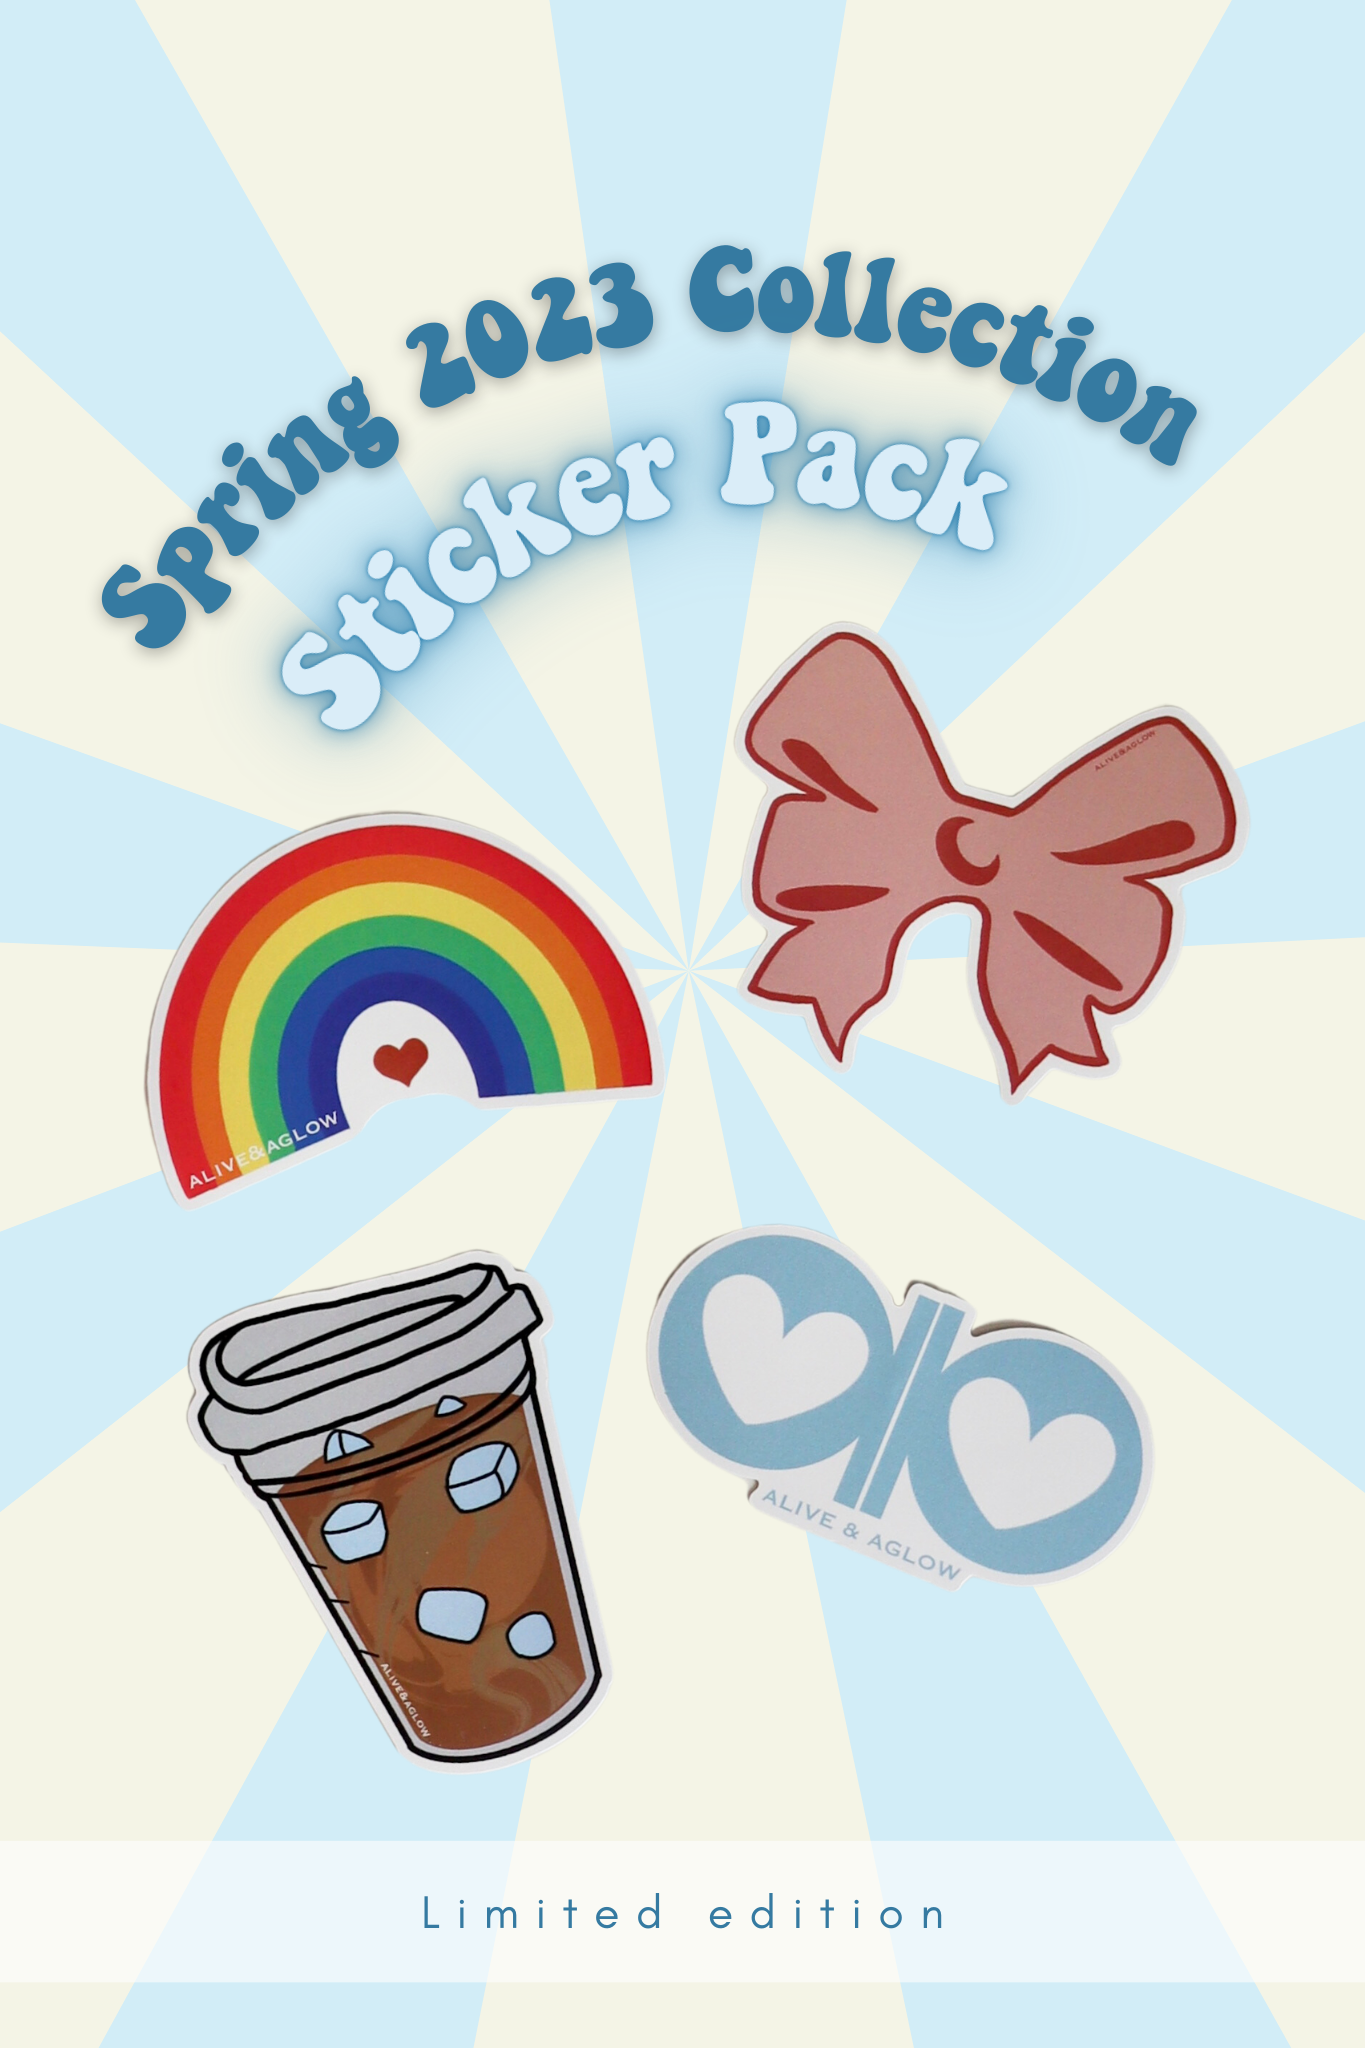 Spring2023CollectionStickerPack_2.png